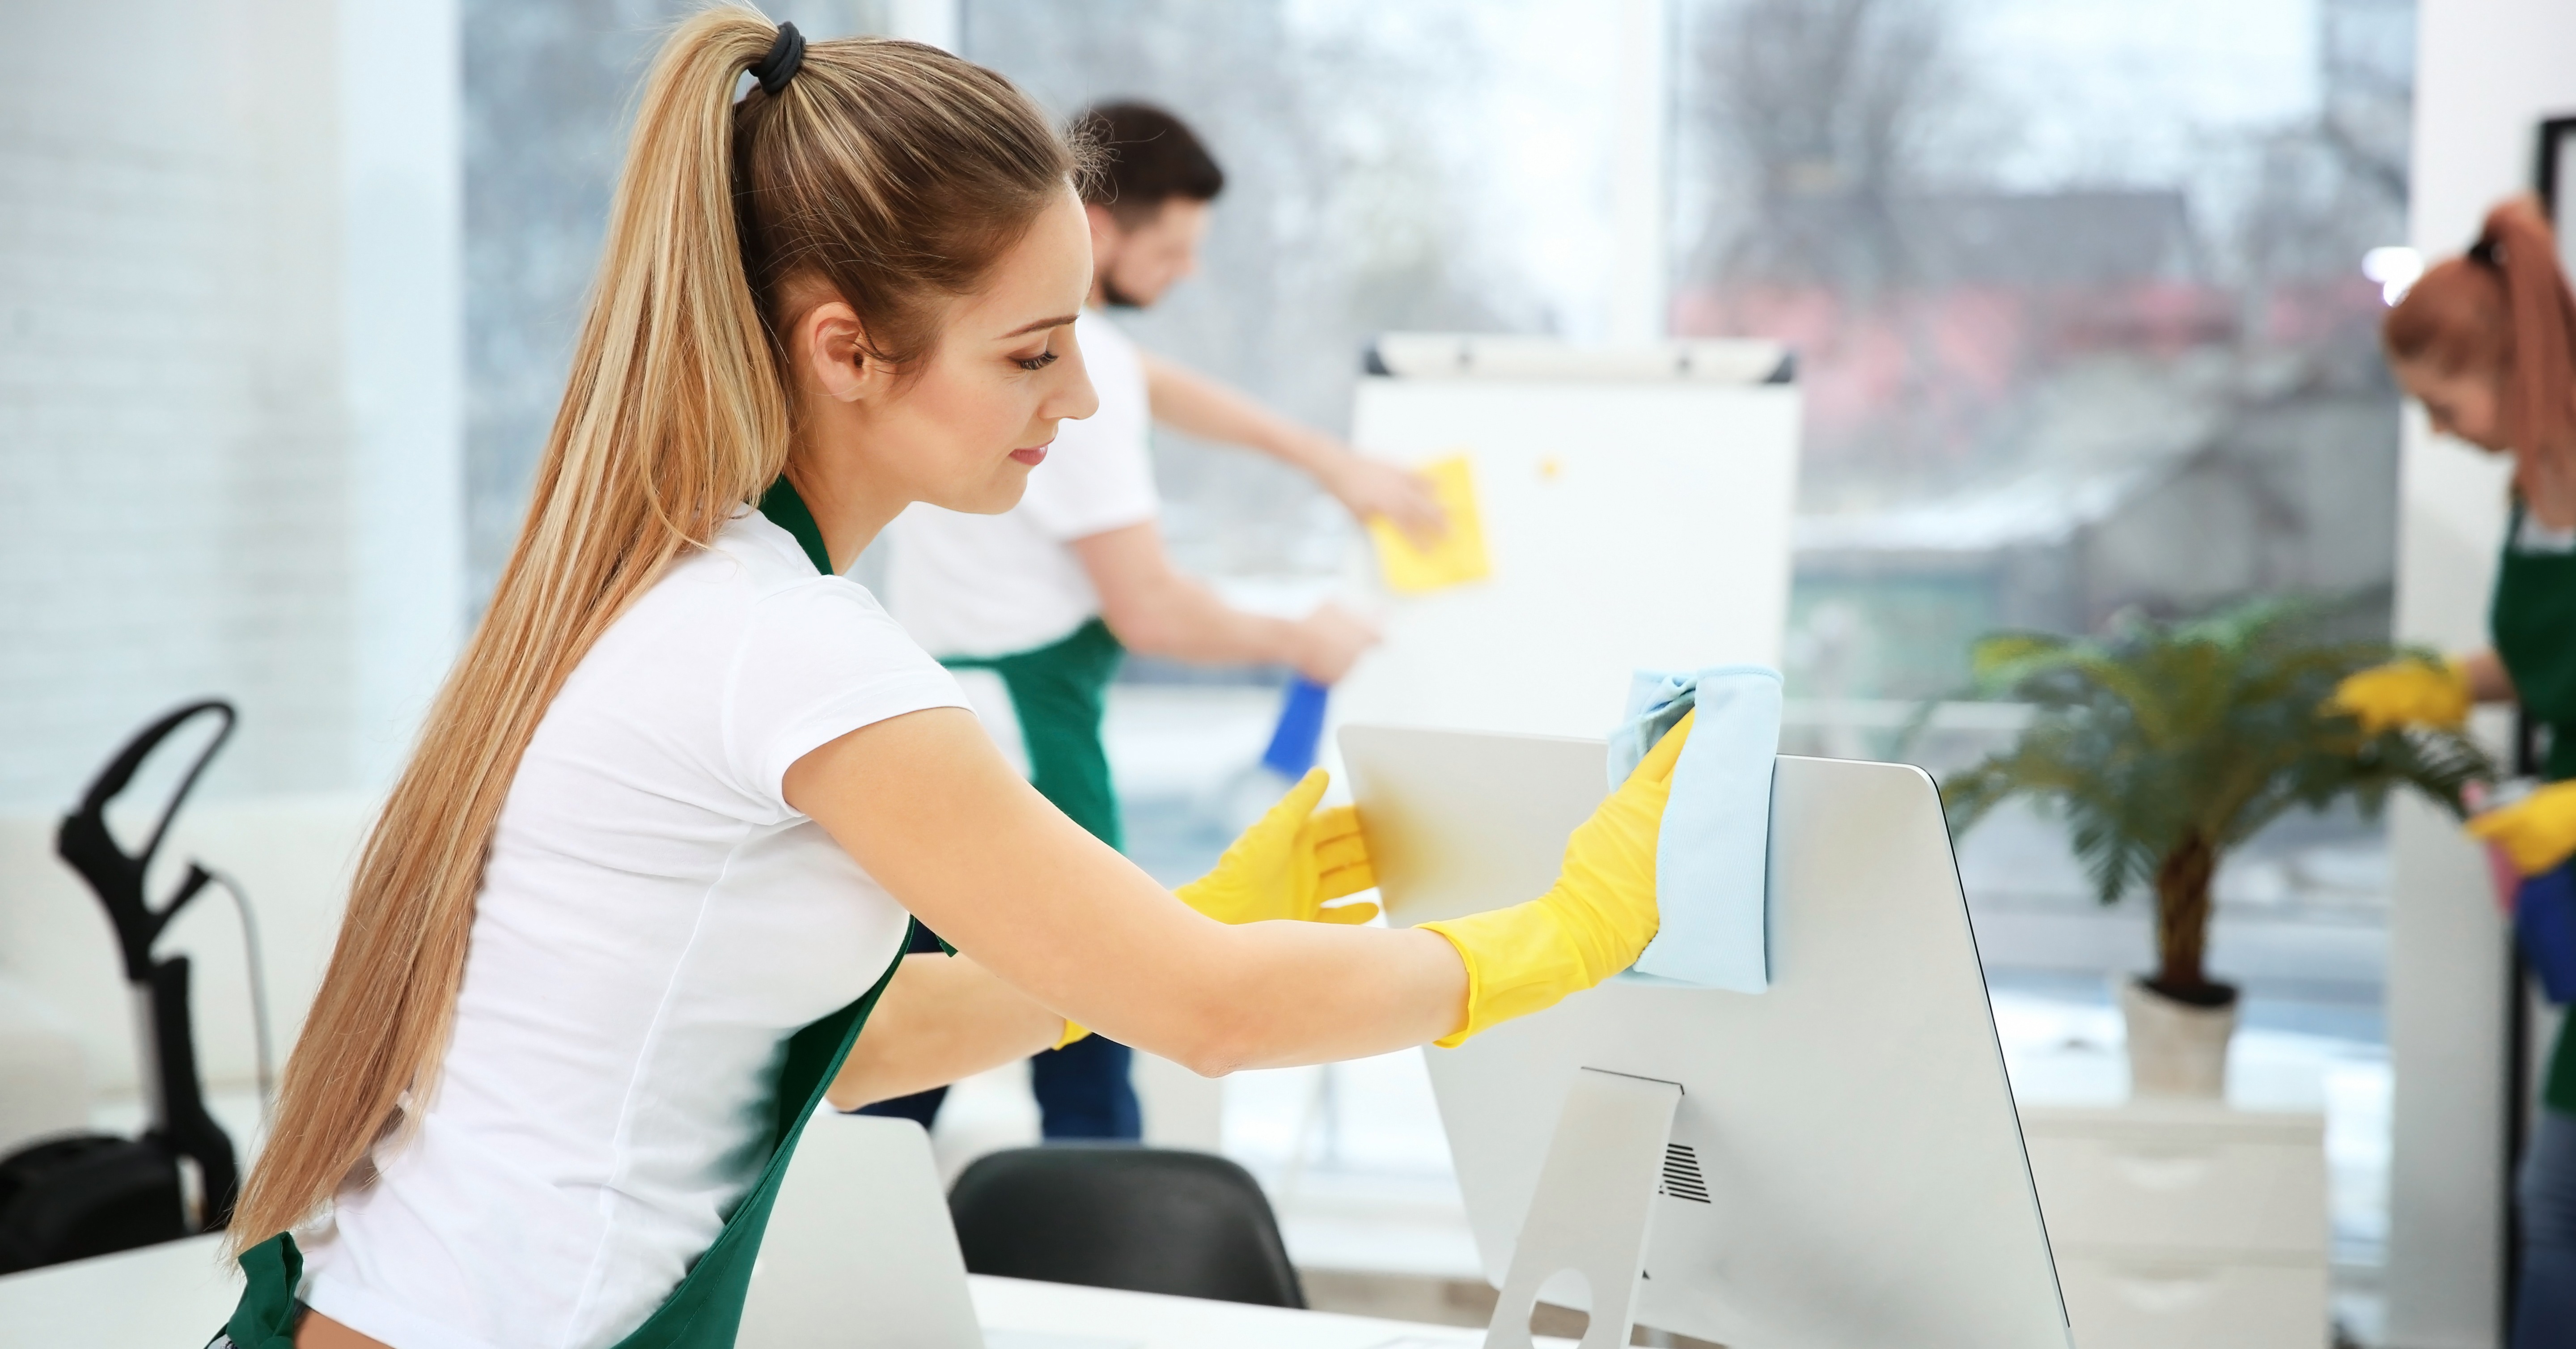 Top 5 Benefits of Office Cleaning